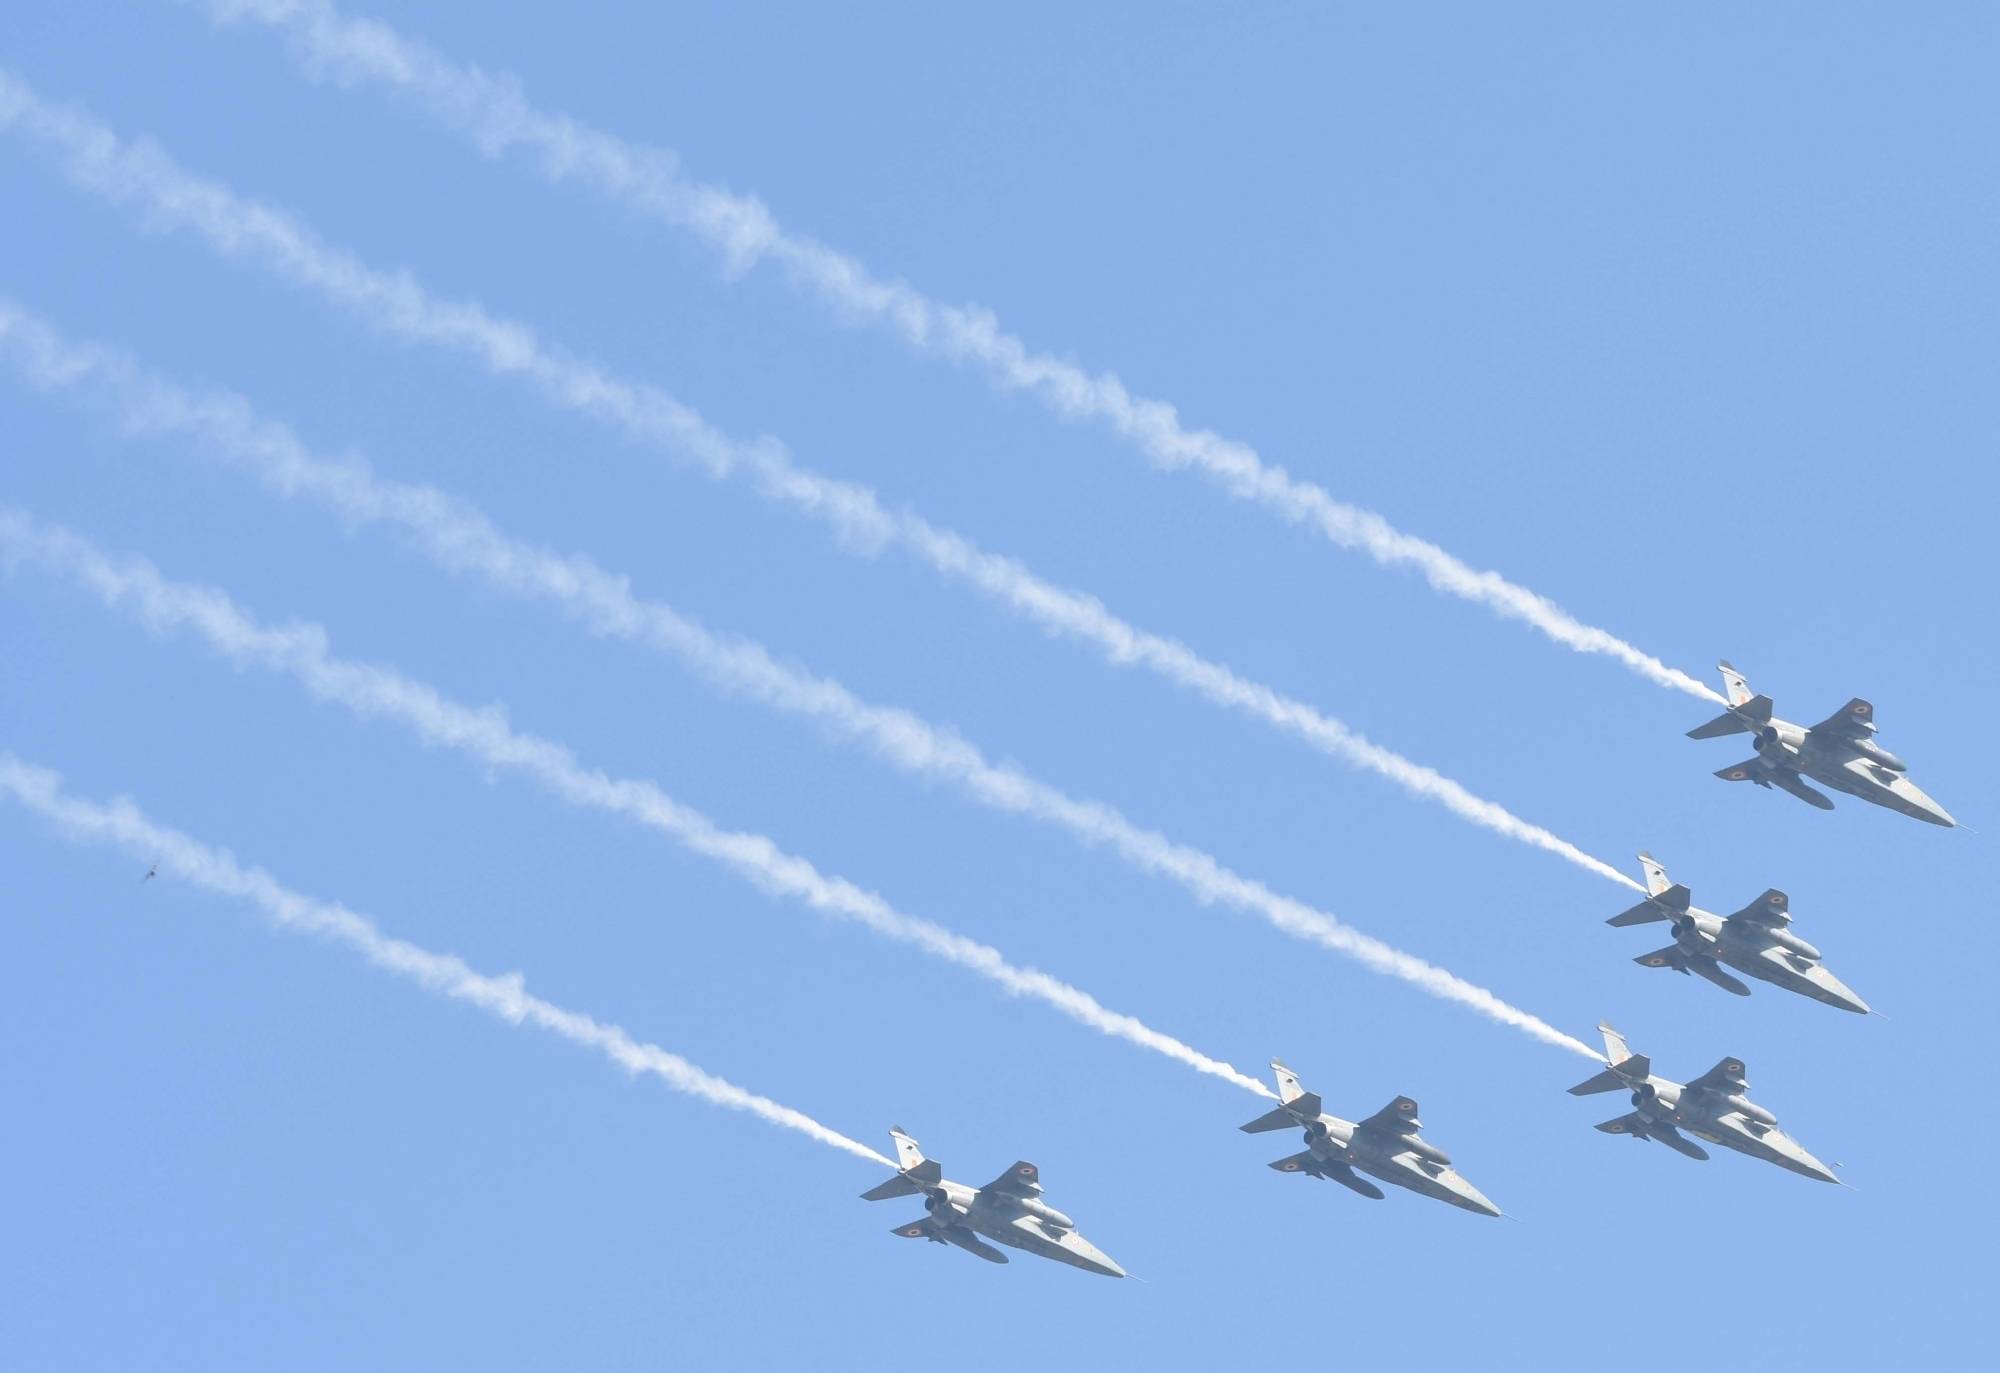 Republic Day Parade: A spectacular flypast of 75 aircraft on Rajpath, people were stunned to see the power of the army